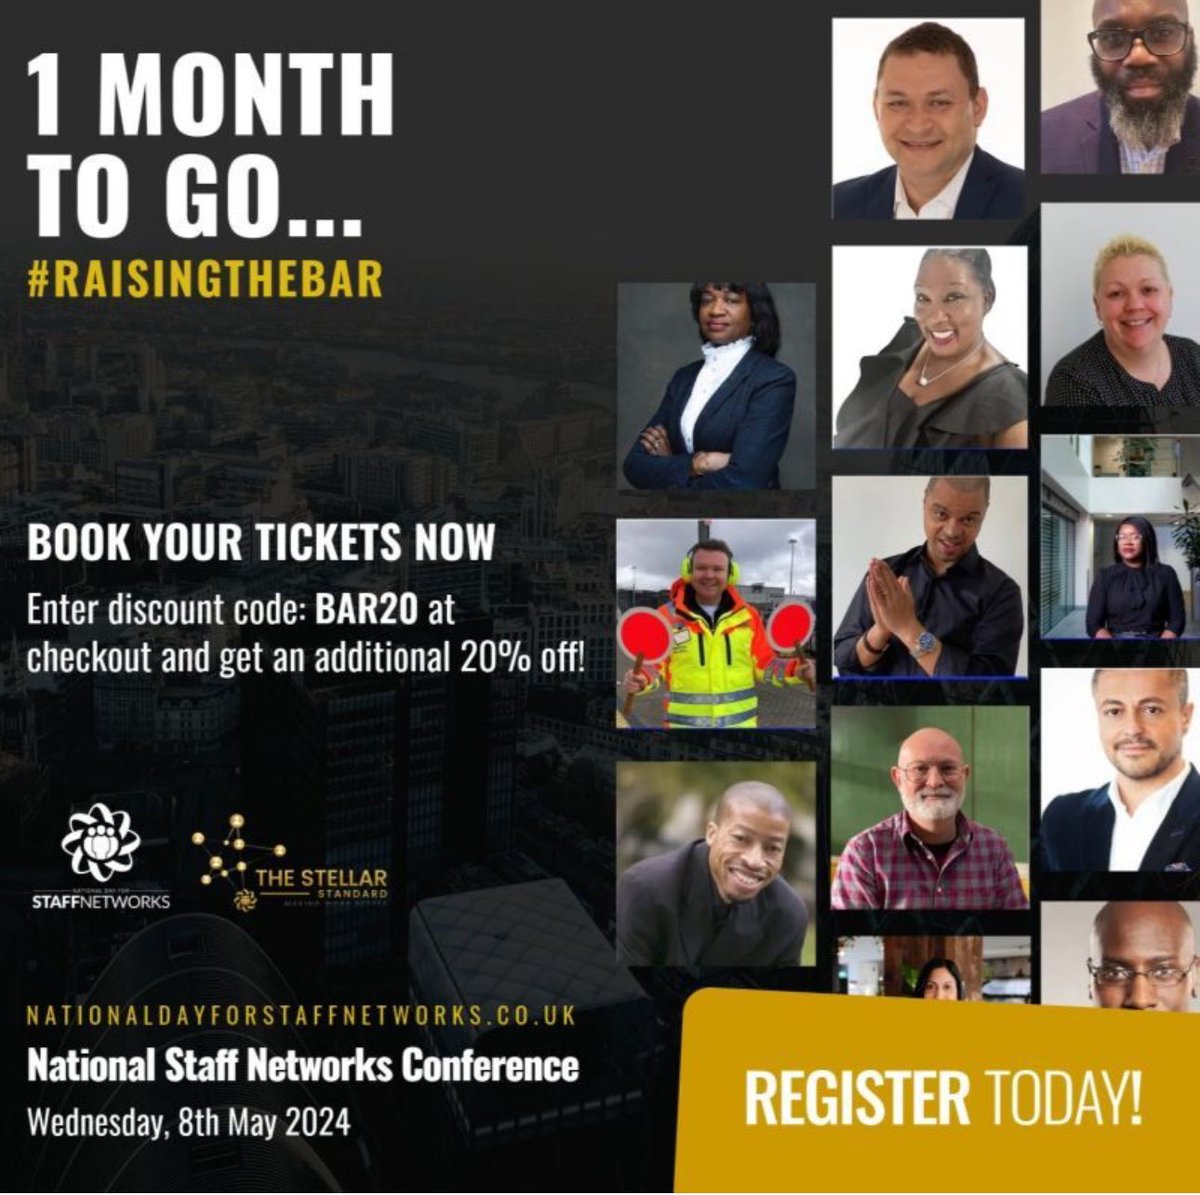 Join us for the first @Day4Networks Staff Networks Day National Conference on 8 May 2024👉🏽⭐️Hurry and get your tickets for this special event to help staff networks flourish, #RaiseTheBar & #MakeWorkBetter for all. ⭐️Use this code BAR20 to get 20% off👉🏽nationaldayforstaffnetworks.co.uk/nationalnetwor…